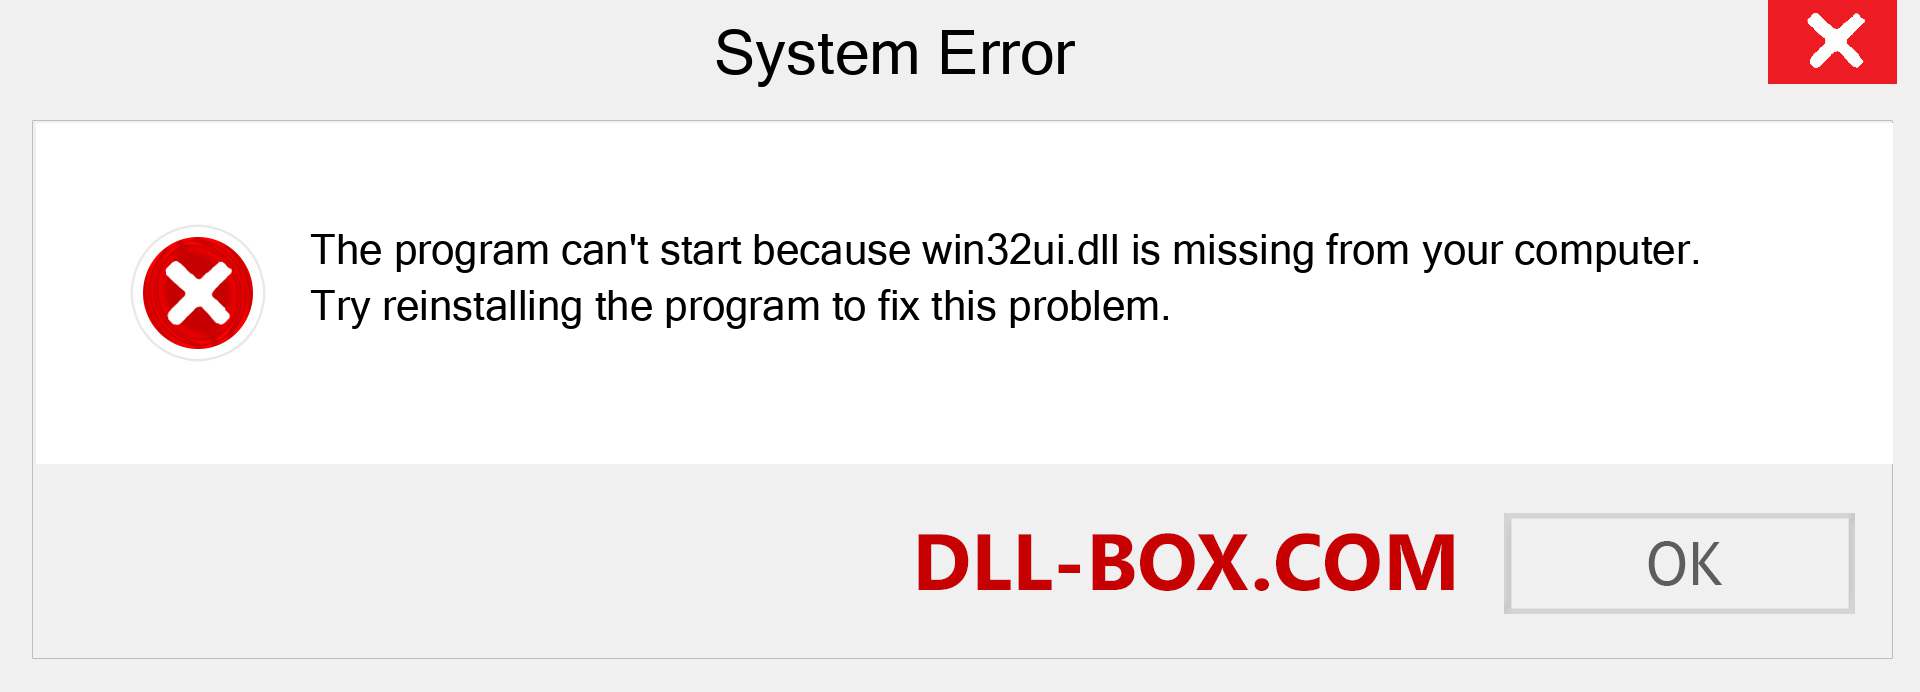  win32ui.dll file is missing?. Download for Windows 7, 8, 10 - Fix  win32ui dll Missing Error on Windows, photos, images